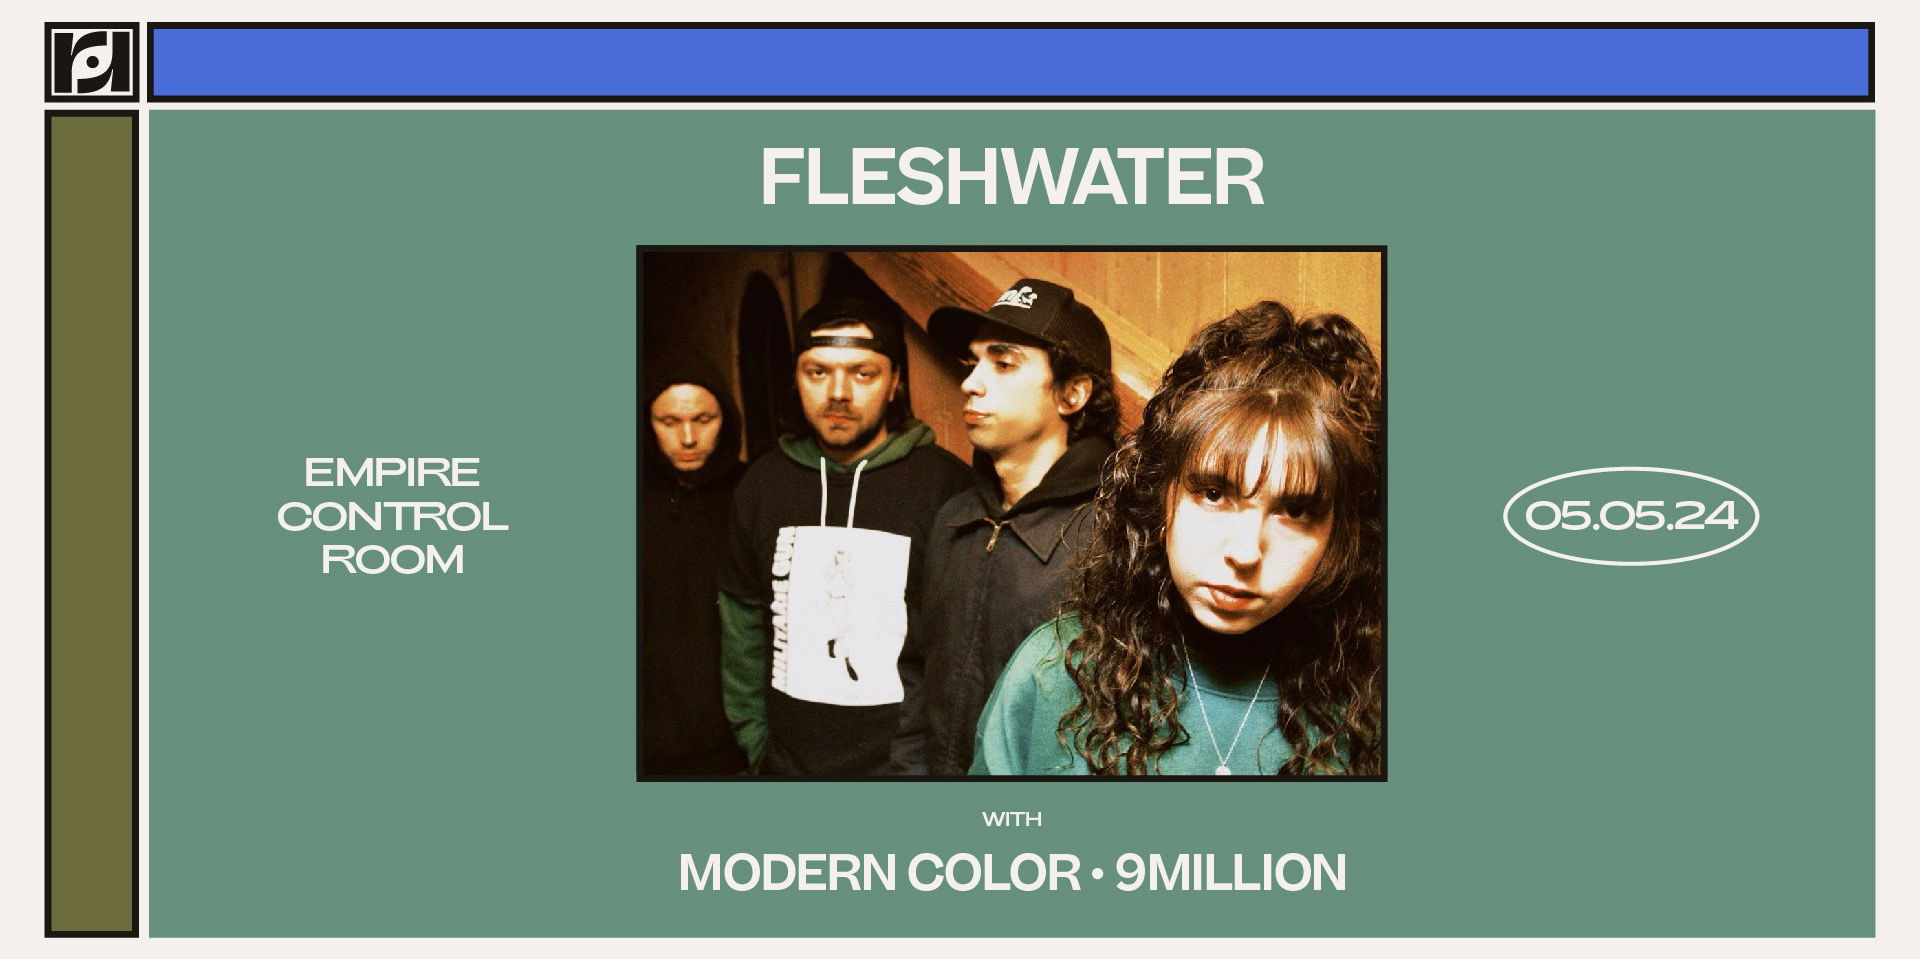 Resound Presents: Fleshwater w/ Modern Color and 9Million at Empire Control Room promotional image